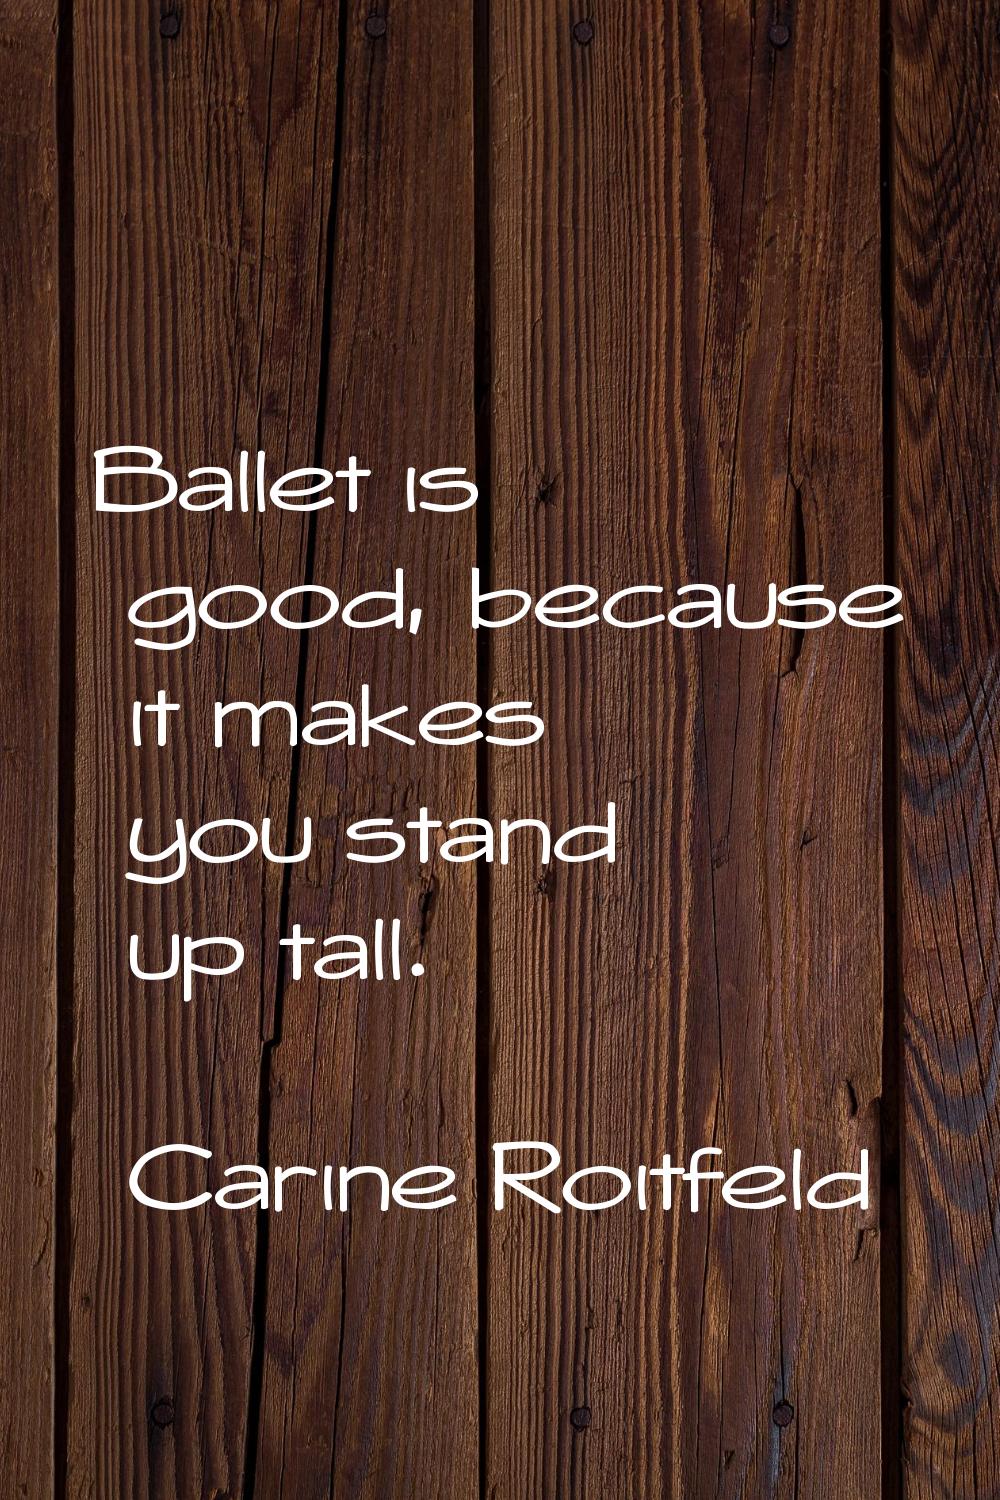 Ballet is good, because it makes you stand up tall.